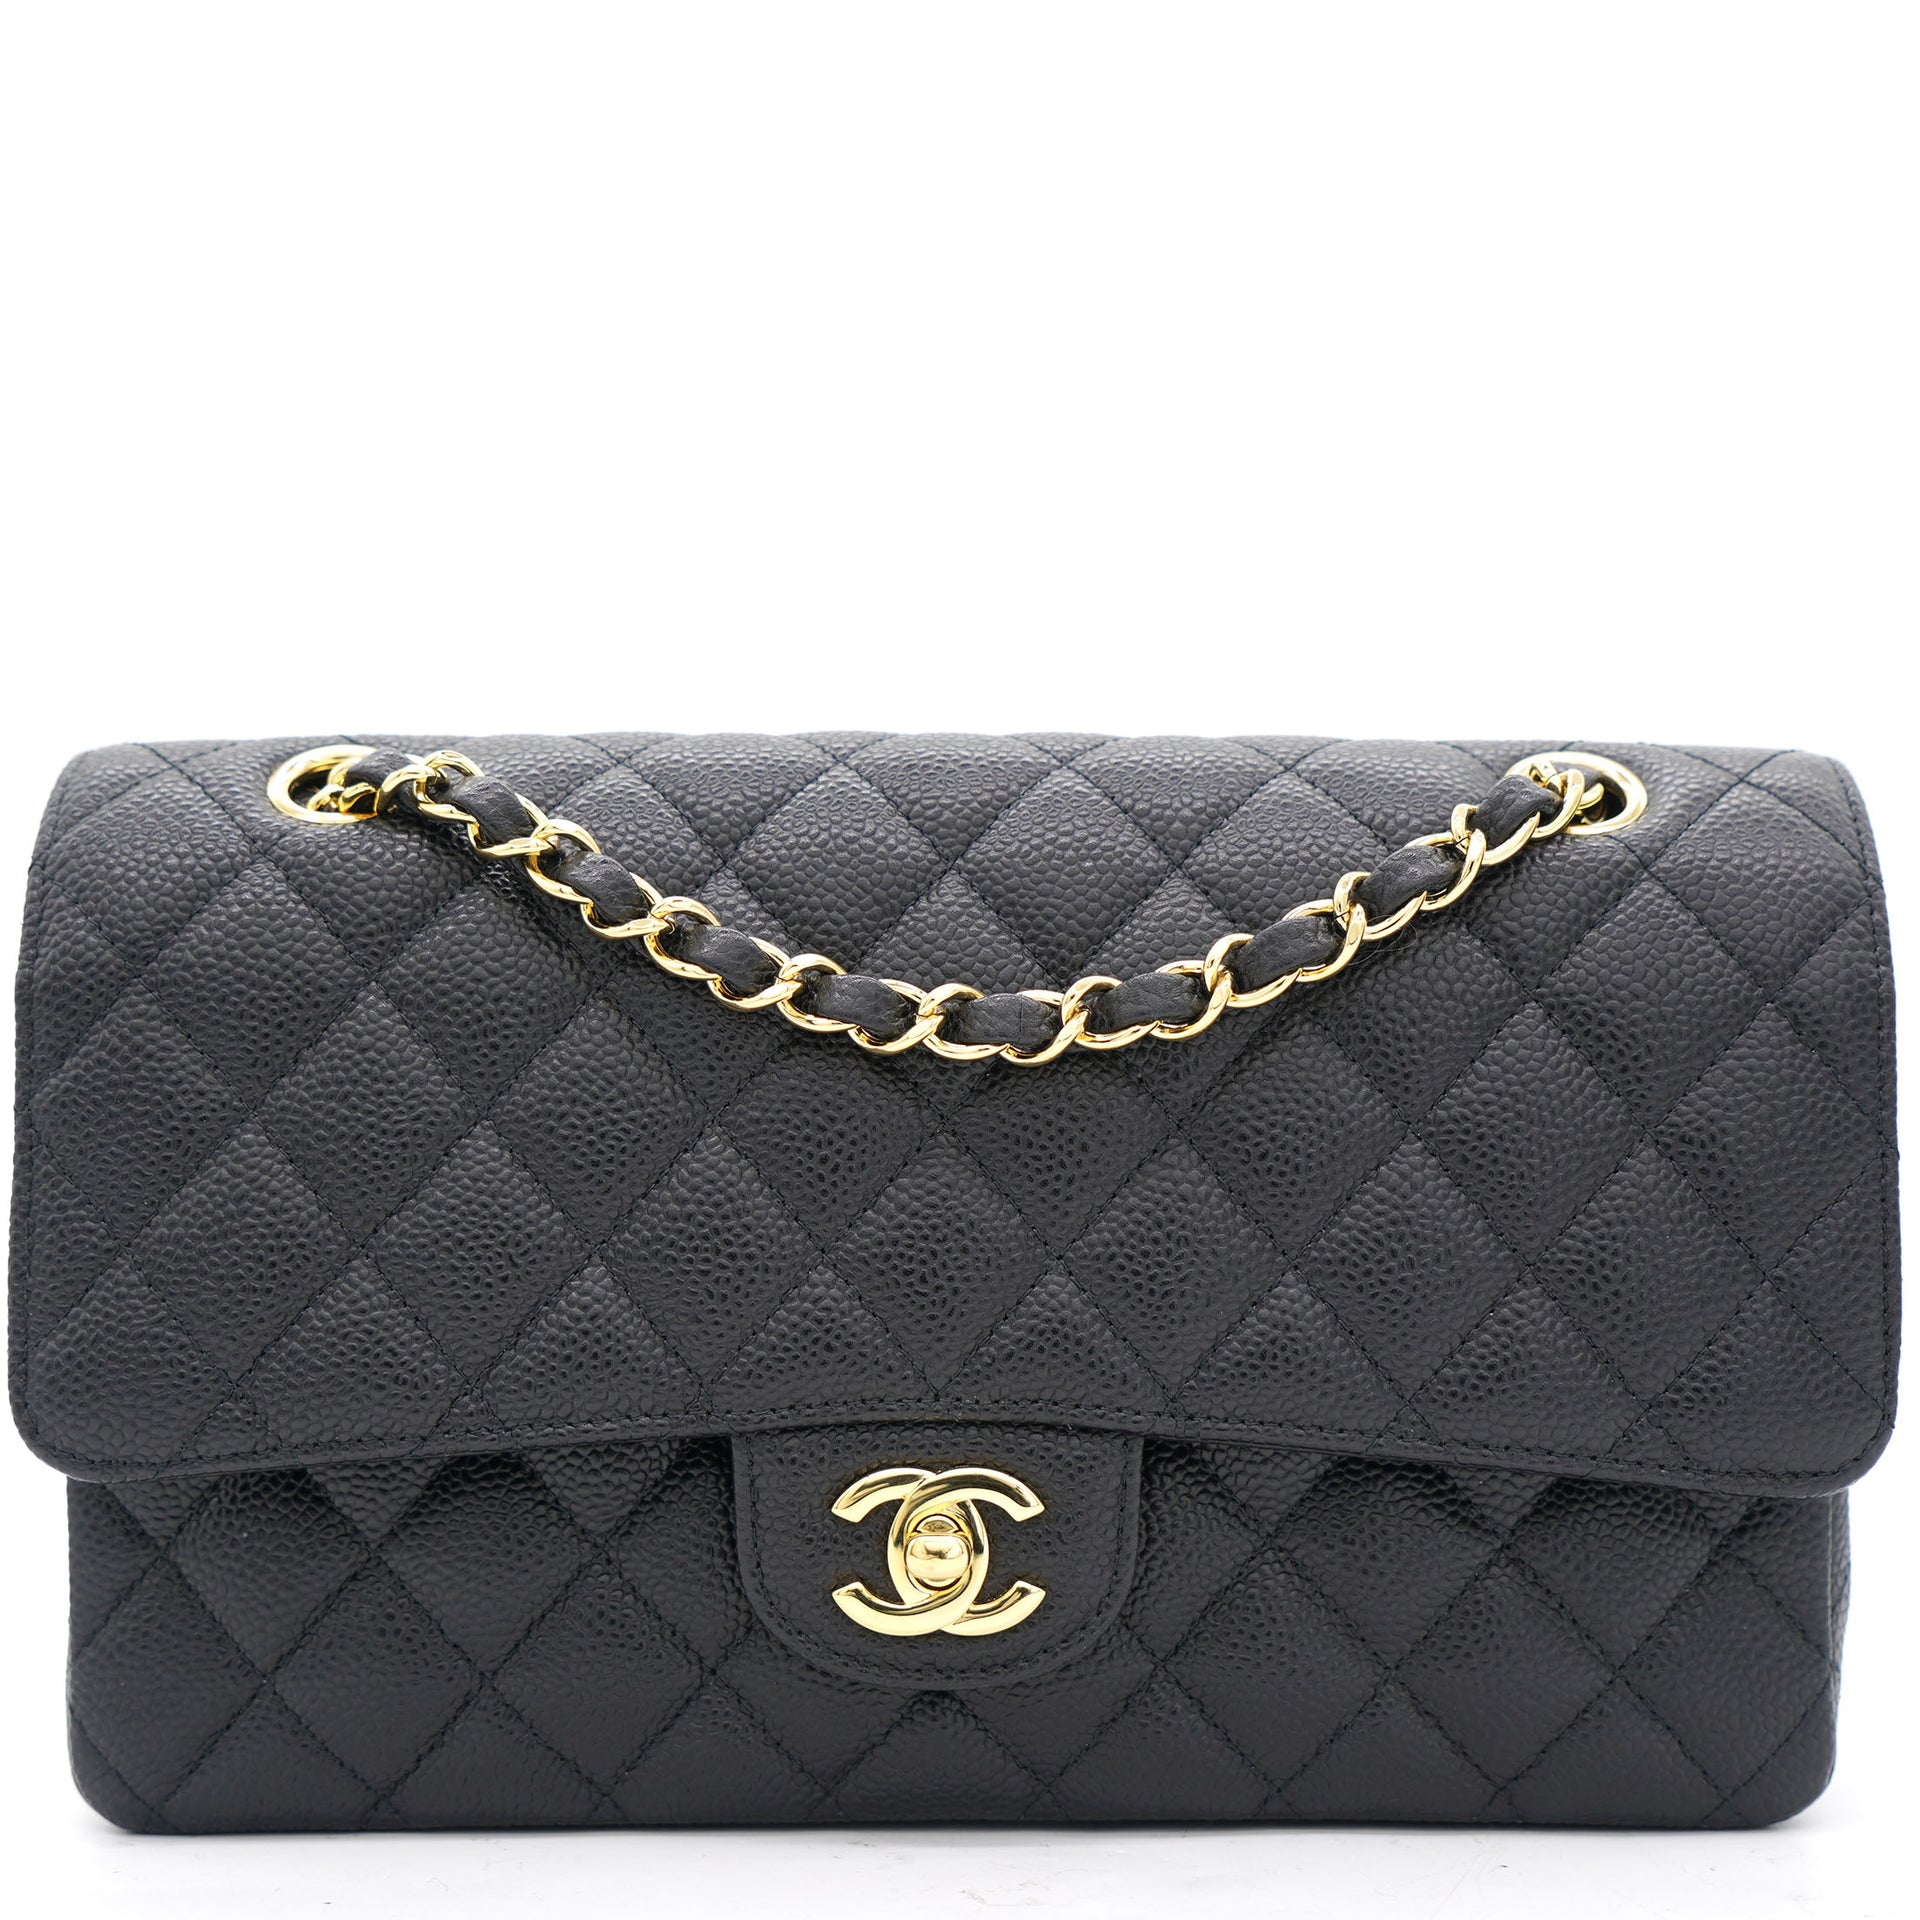 Chanel Timeless Classic 255 Large Jumbo Double Flap Bag in Black Caviar  with Gold Hardware